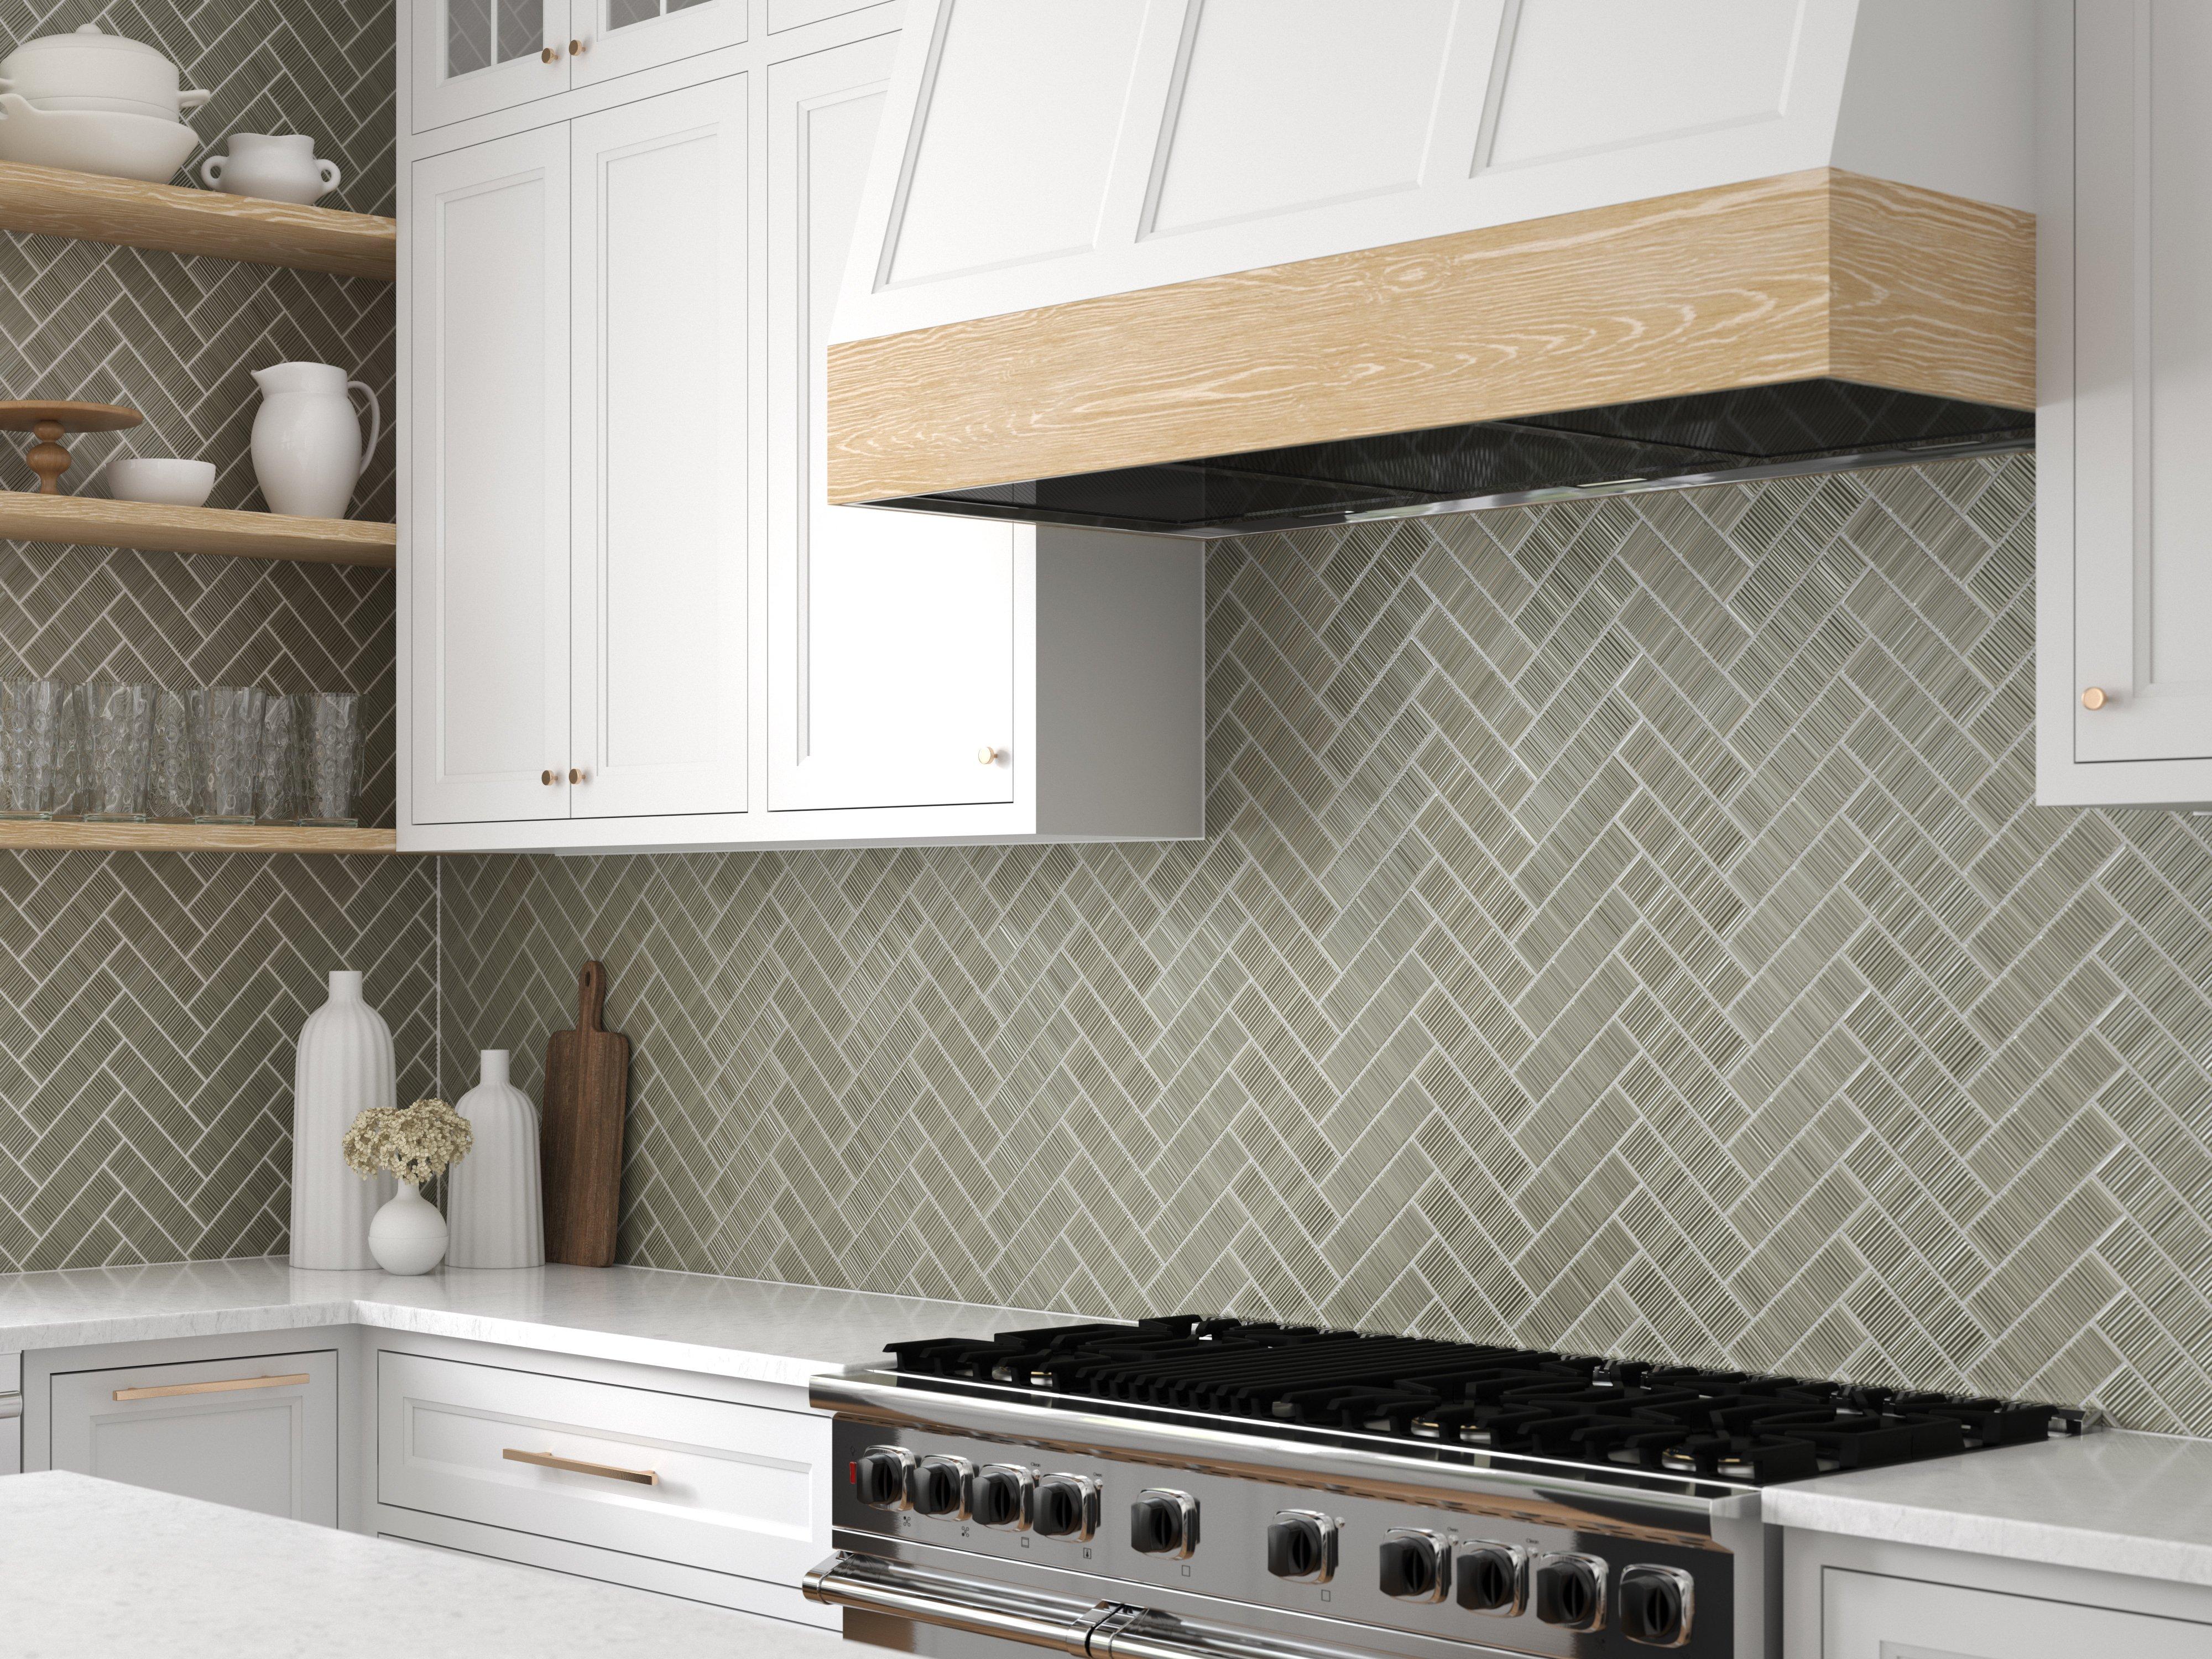 Ribbed Thyme Glossy Ceramic Tile